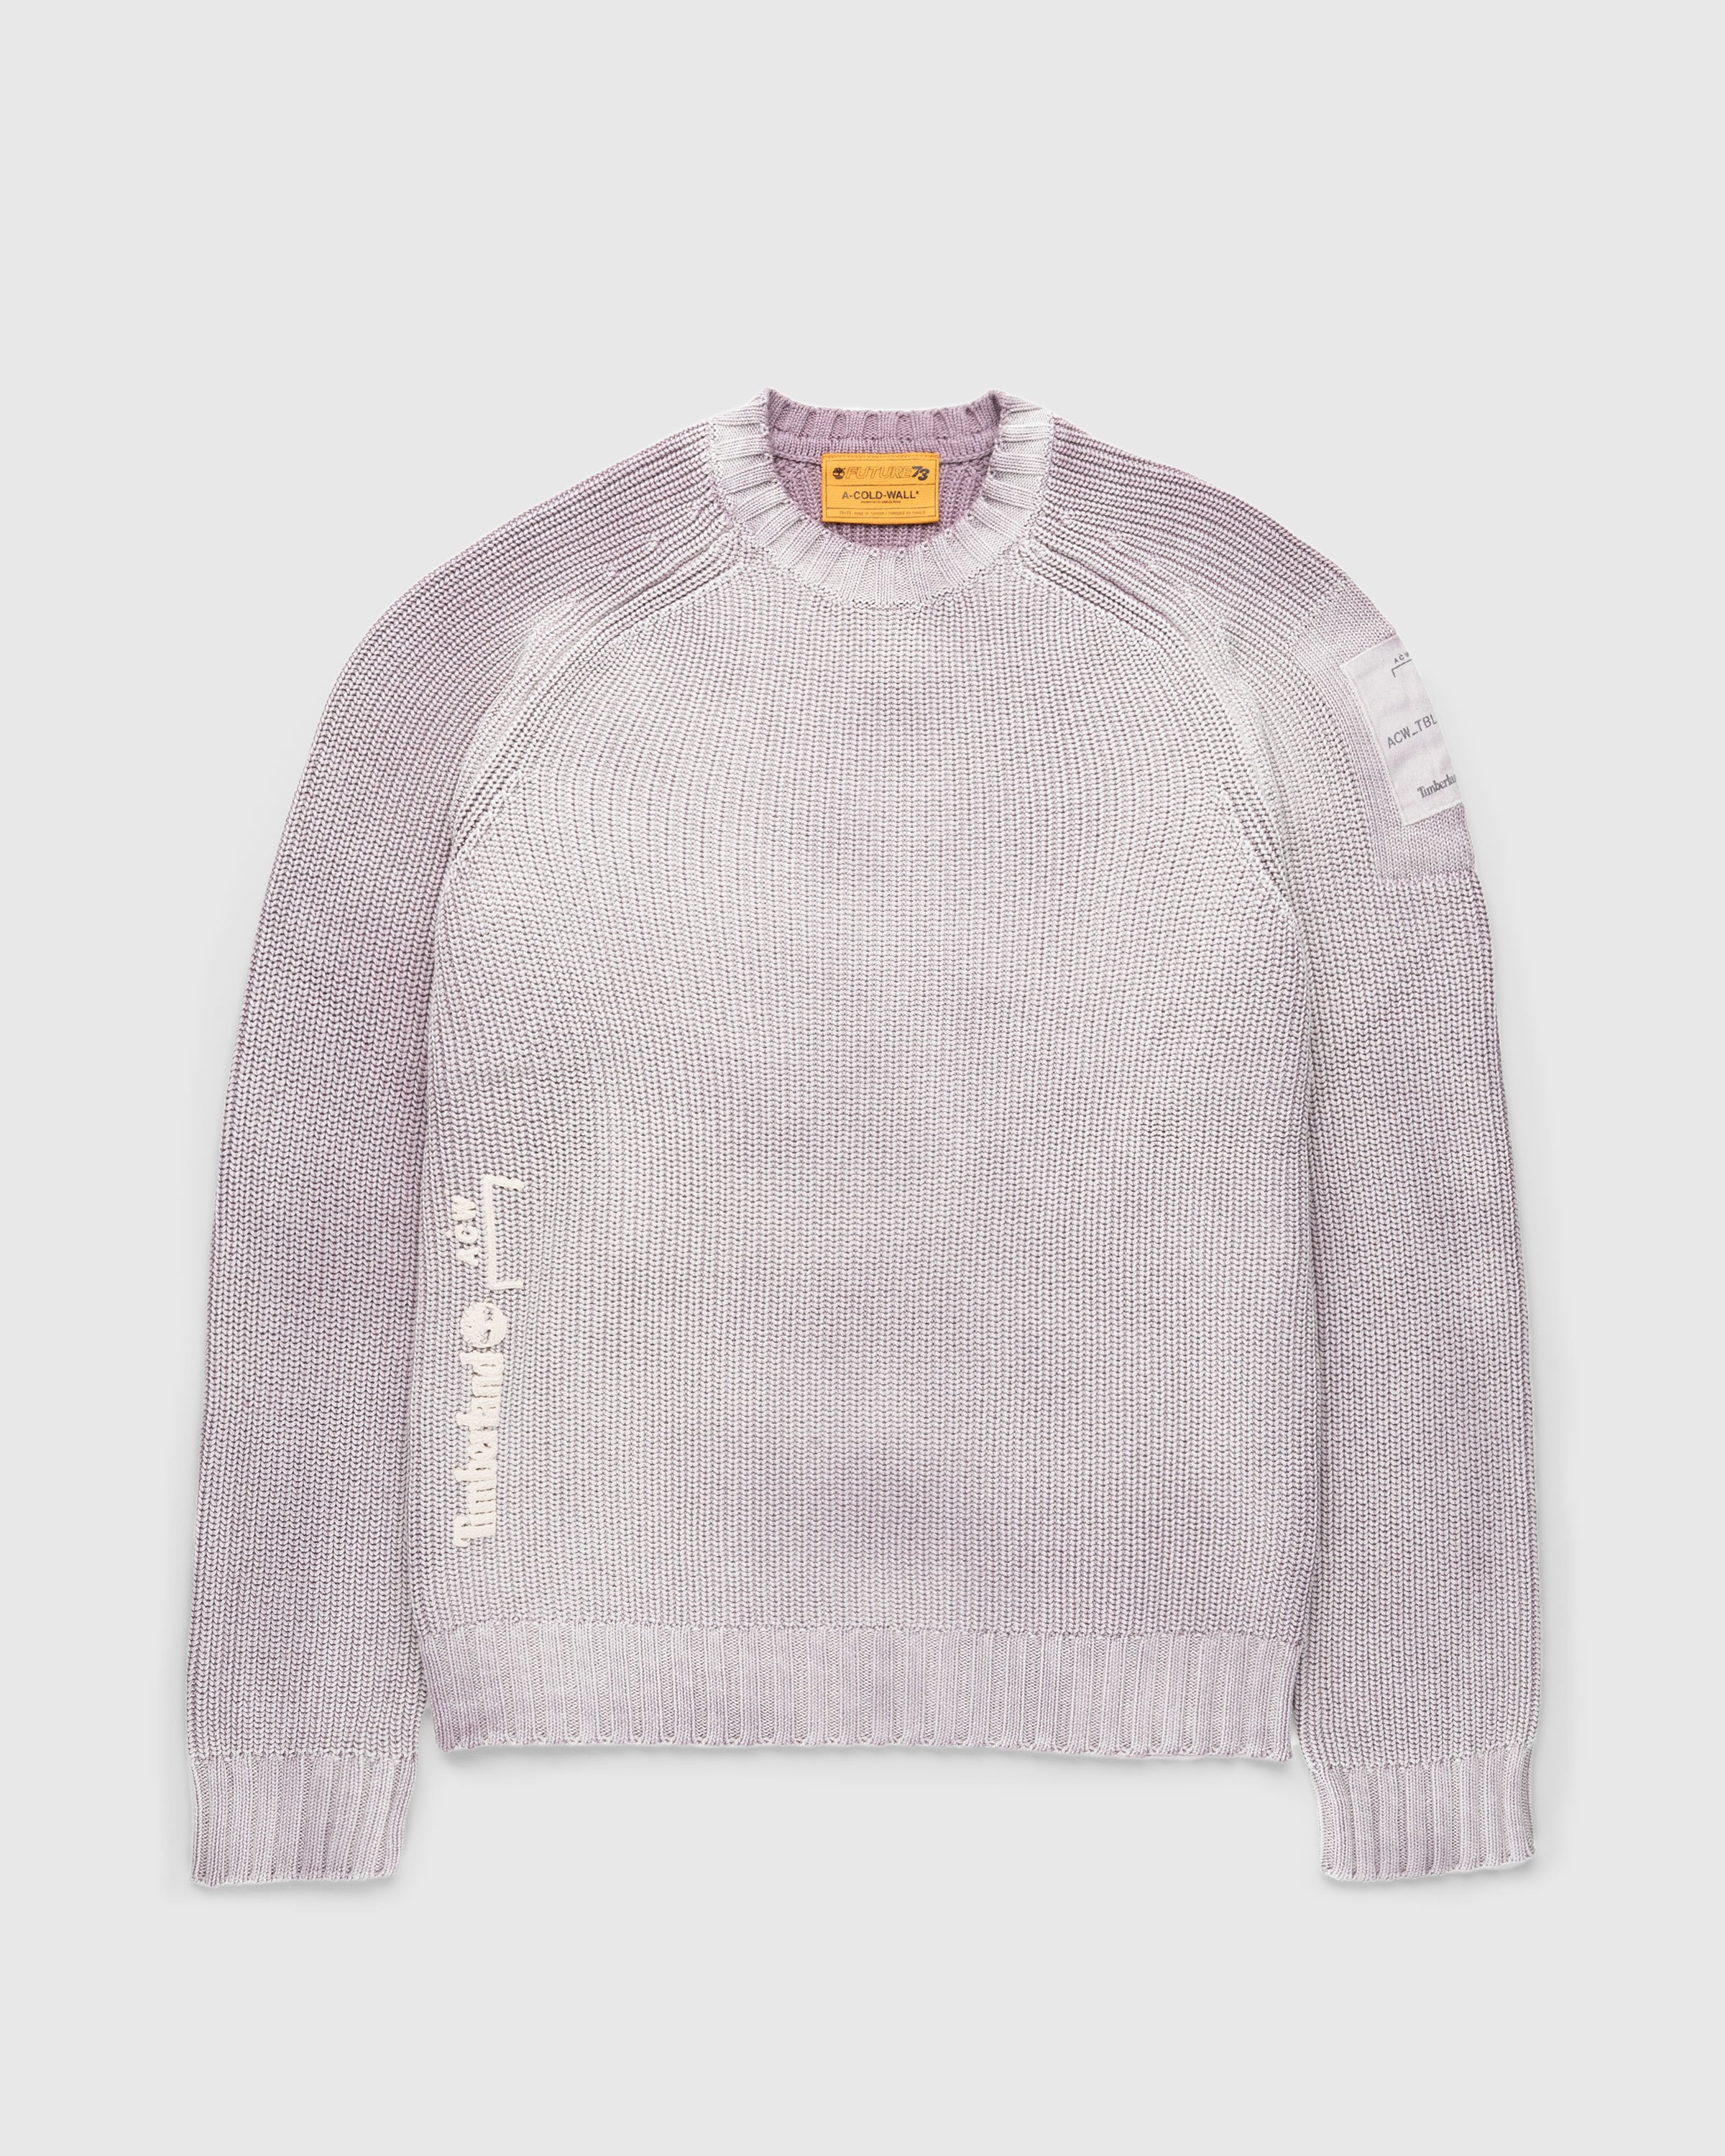 A-Cold-Wall* x Timberland - Fisherman Knit Moonscape - Clothing - Purple - Image 1